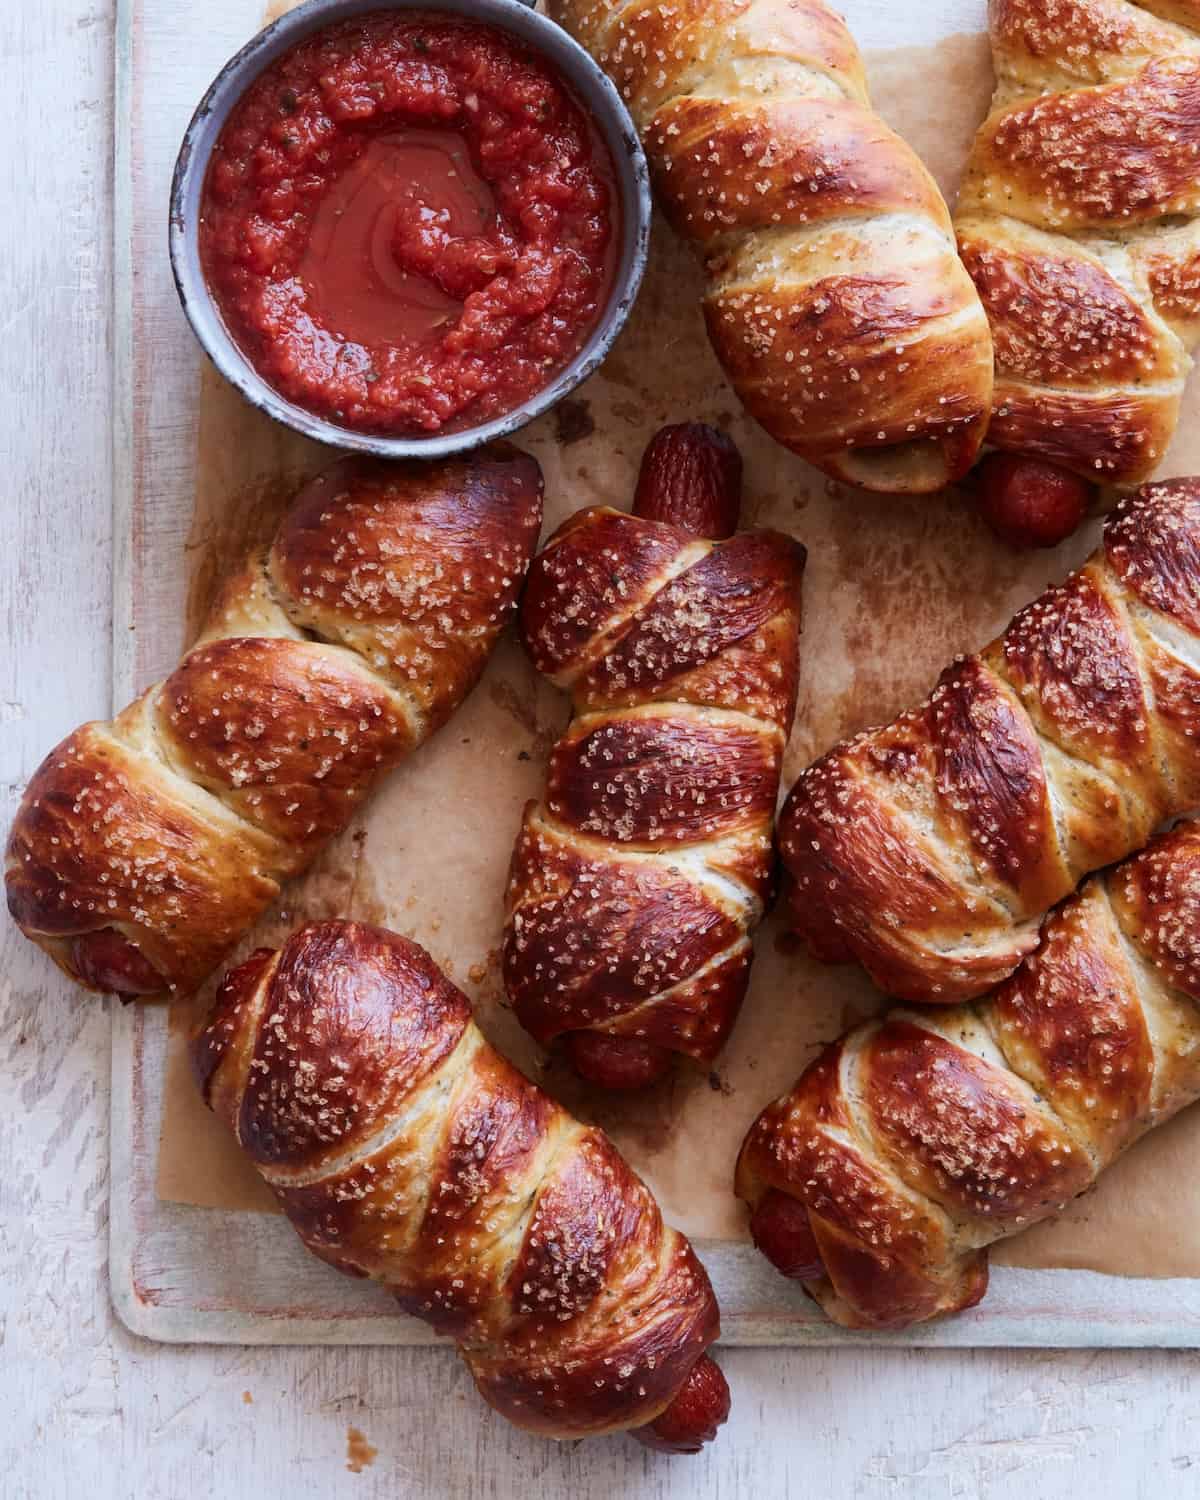 Seven pretzel dogs and a small bowl of marinara sauce for dipping placed on a parchment paper lined board.